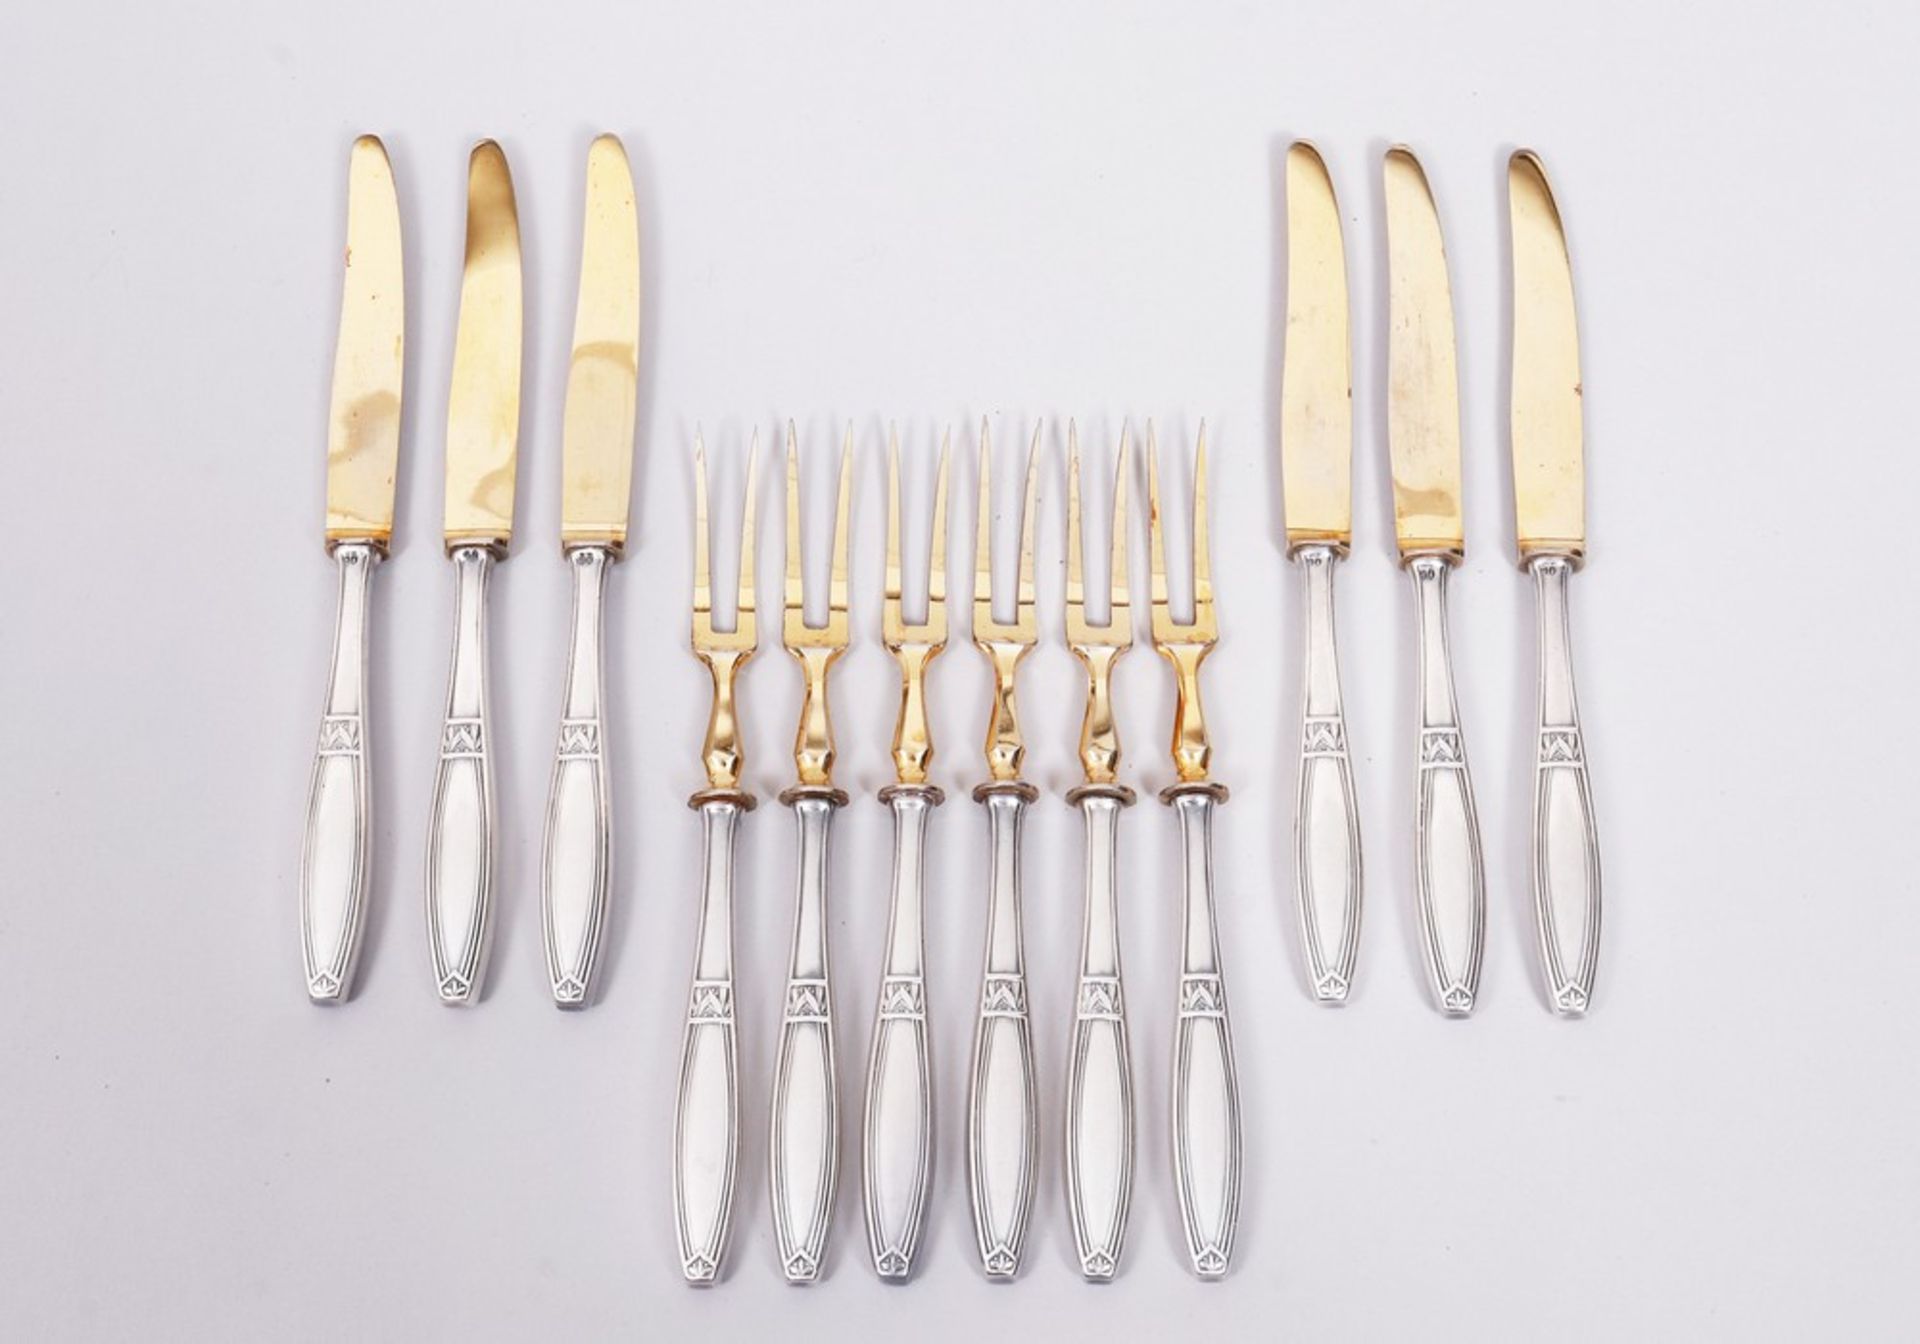 Art Nouveau fruit cutlery set for 6 people, silver-plated, partially gilt, c. 1900, 12 pcs. - Image 2 of 7